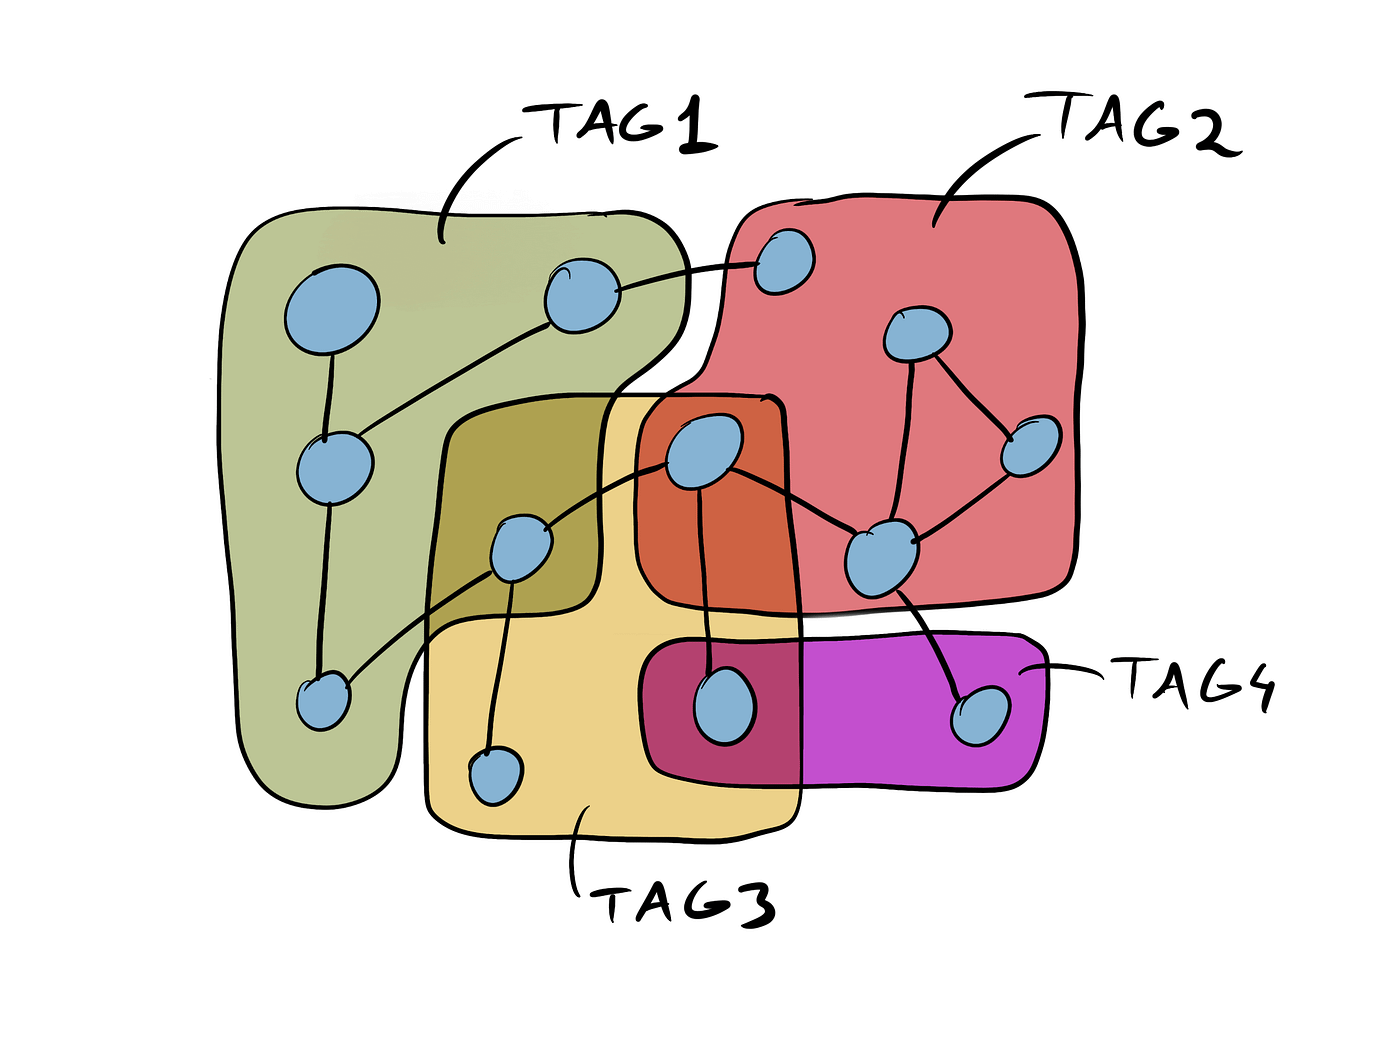 Ideas organised by tags and interconnected by links